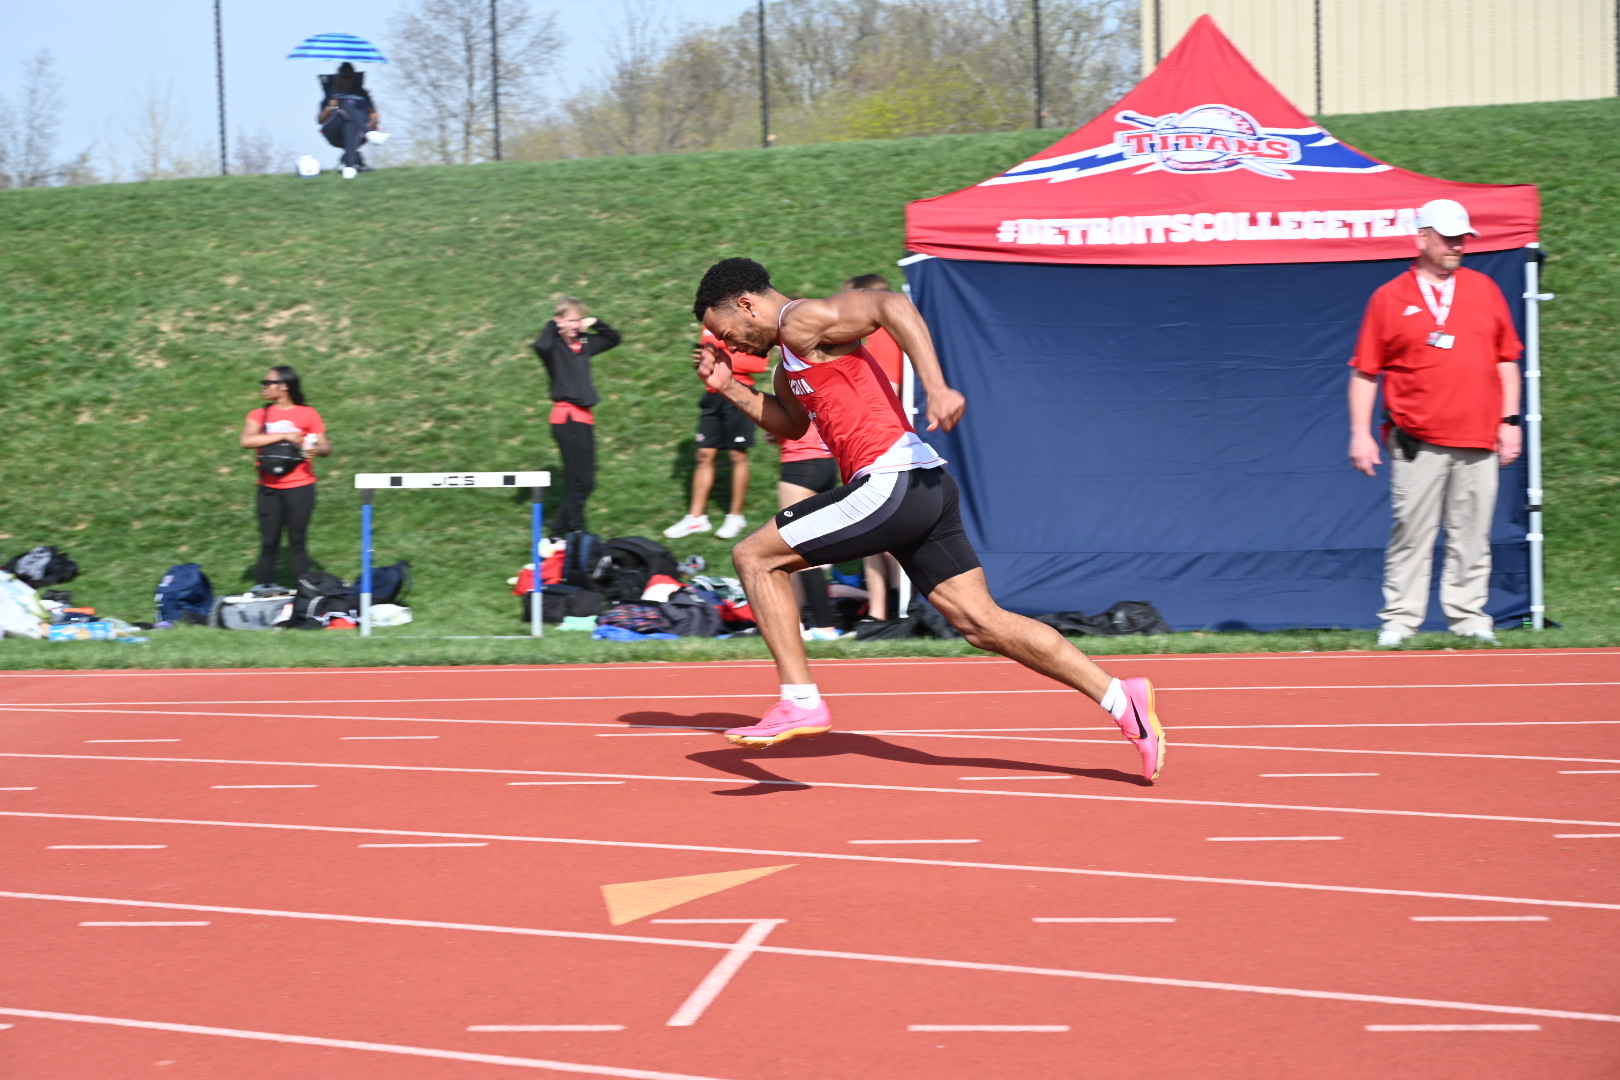 Warren records school records in 100m and 200m as Men's Track and Field performs strong at Don Kleinow Invitational